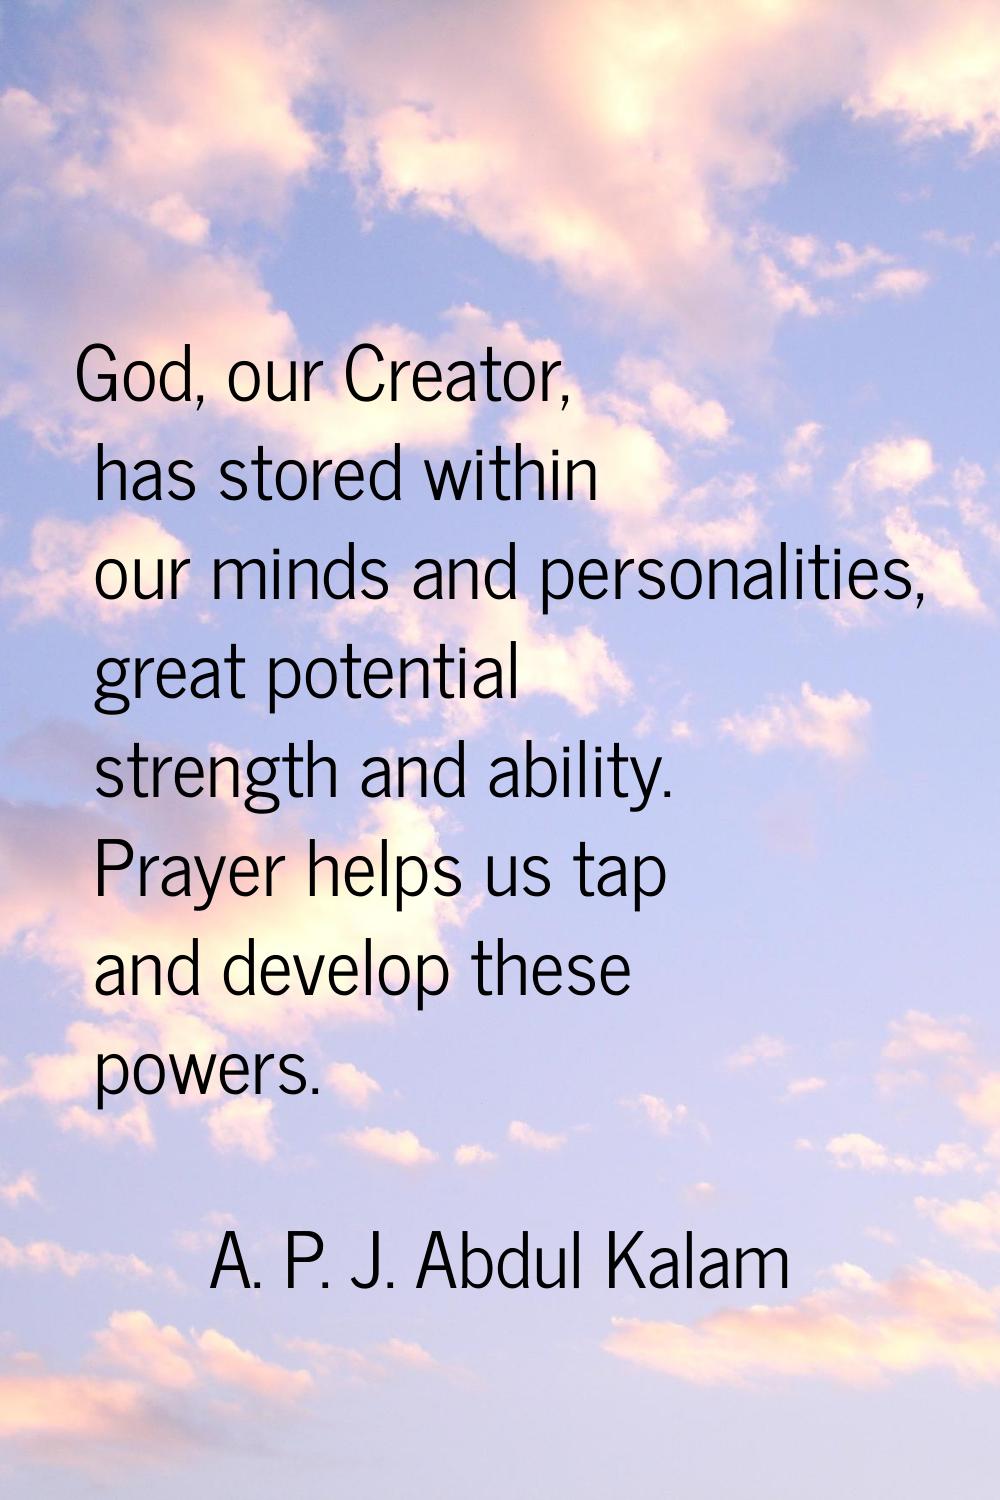 God, our Creator, has stored within our minds and personalities, great potential strength and abili